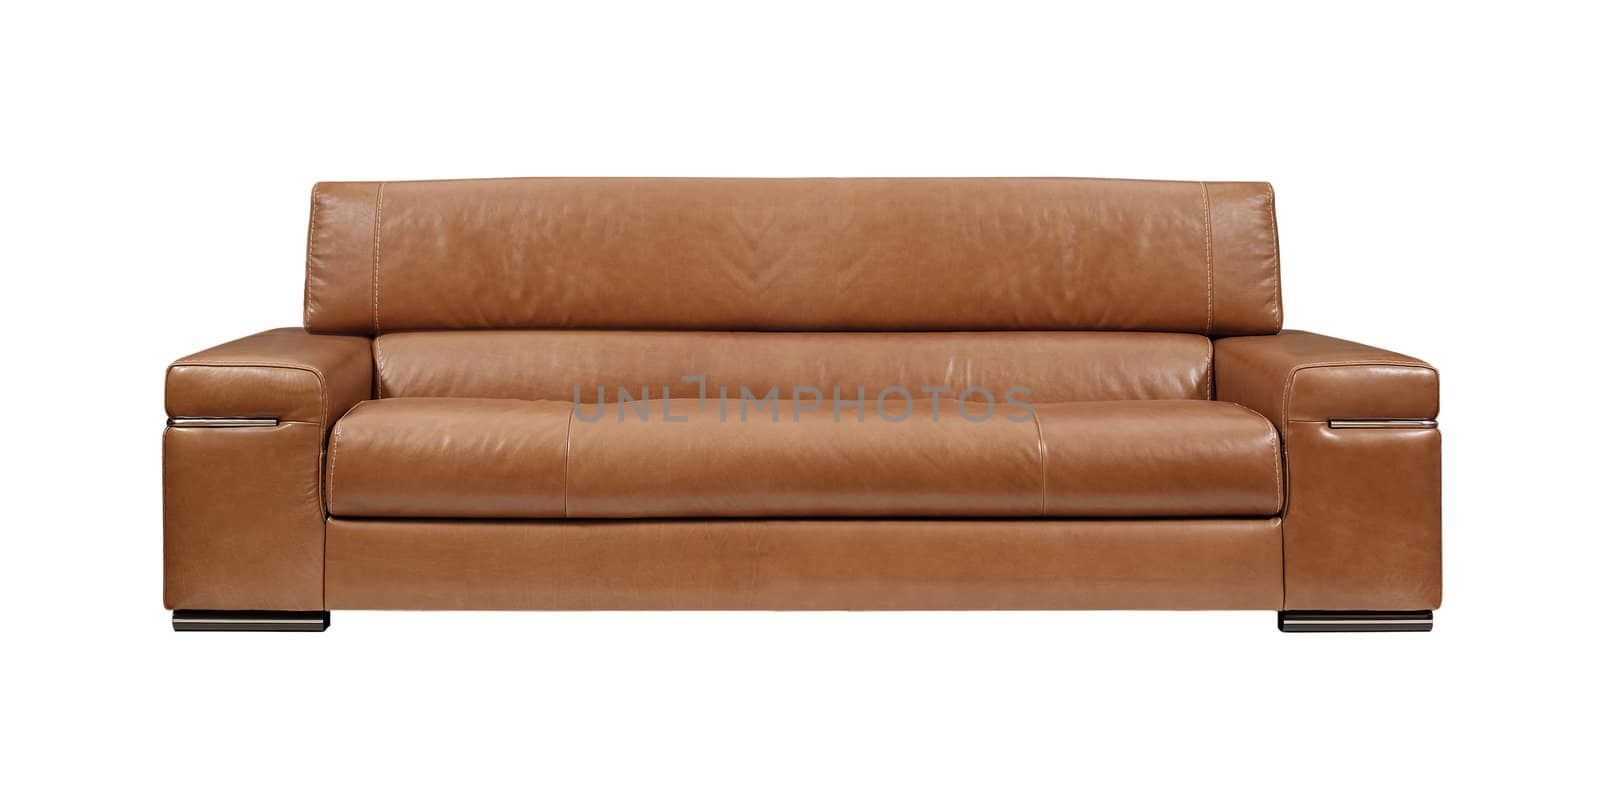 brown sofa over white background by ozaiachin